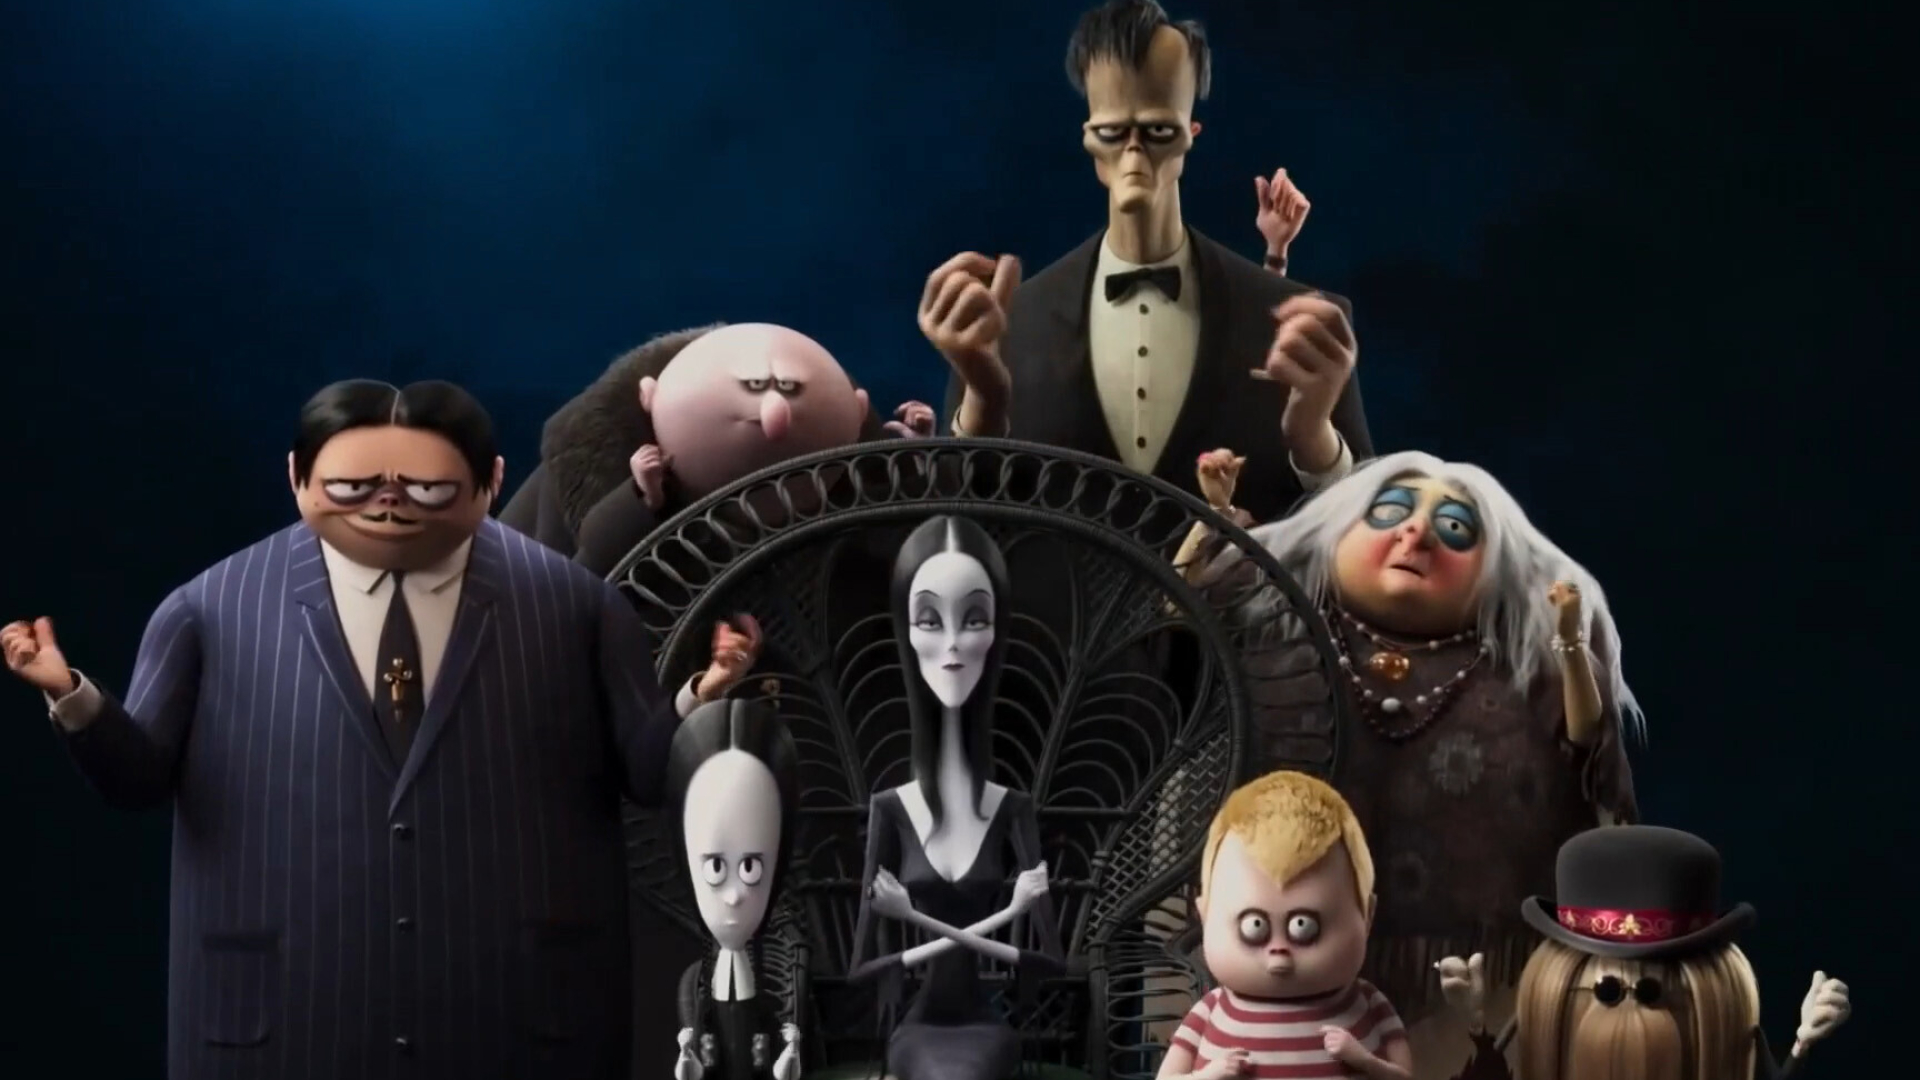 The Addams Family 2: 2021 movie, Nominated for Best Animated Film at the 47th Saturn Awards. 1920x1080 Full HD Background.